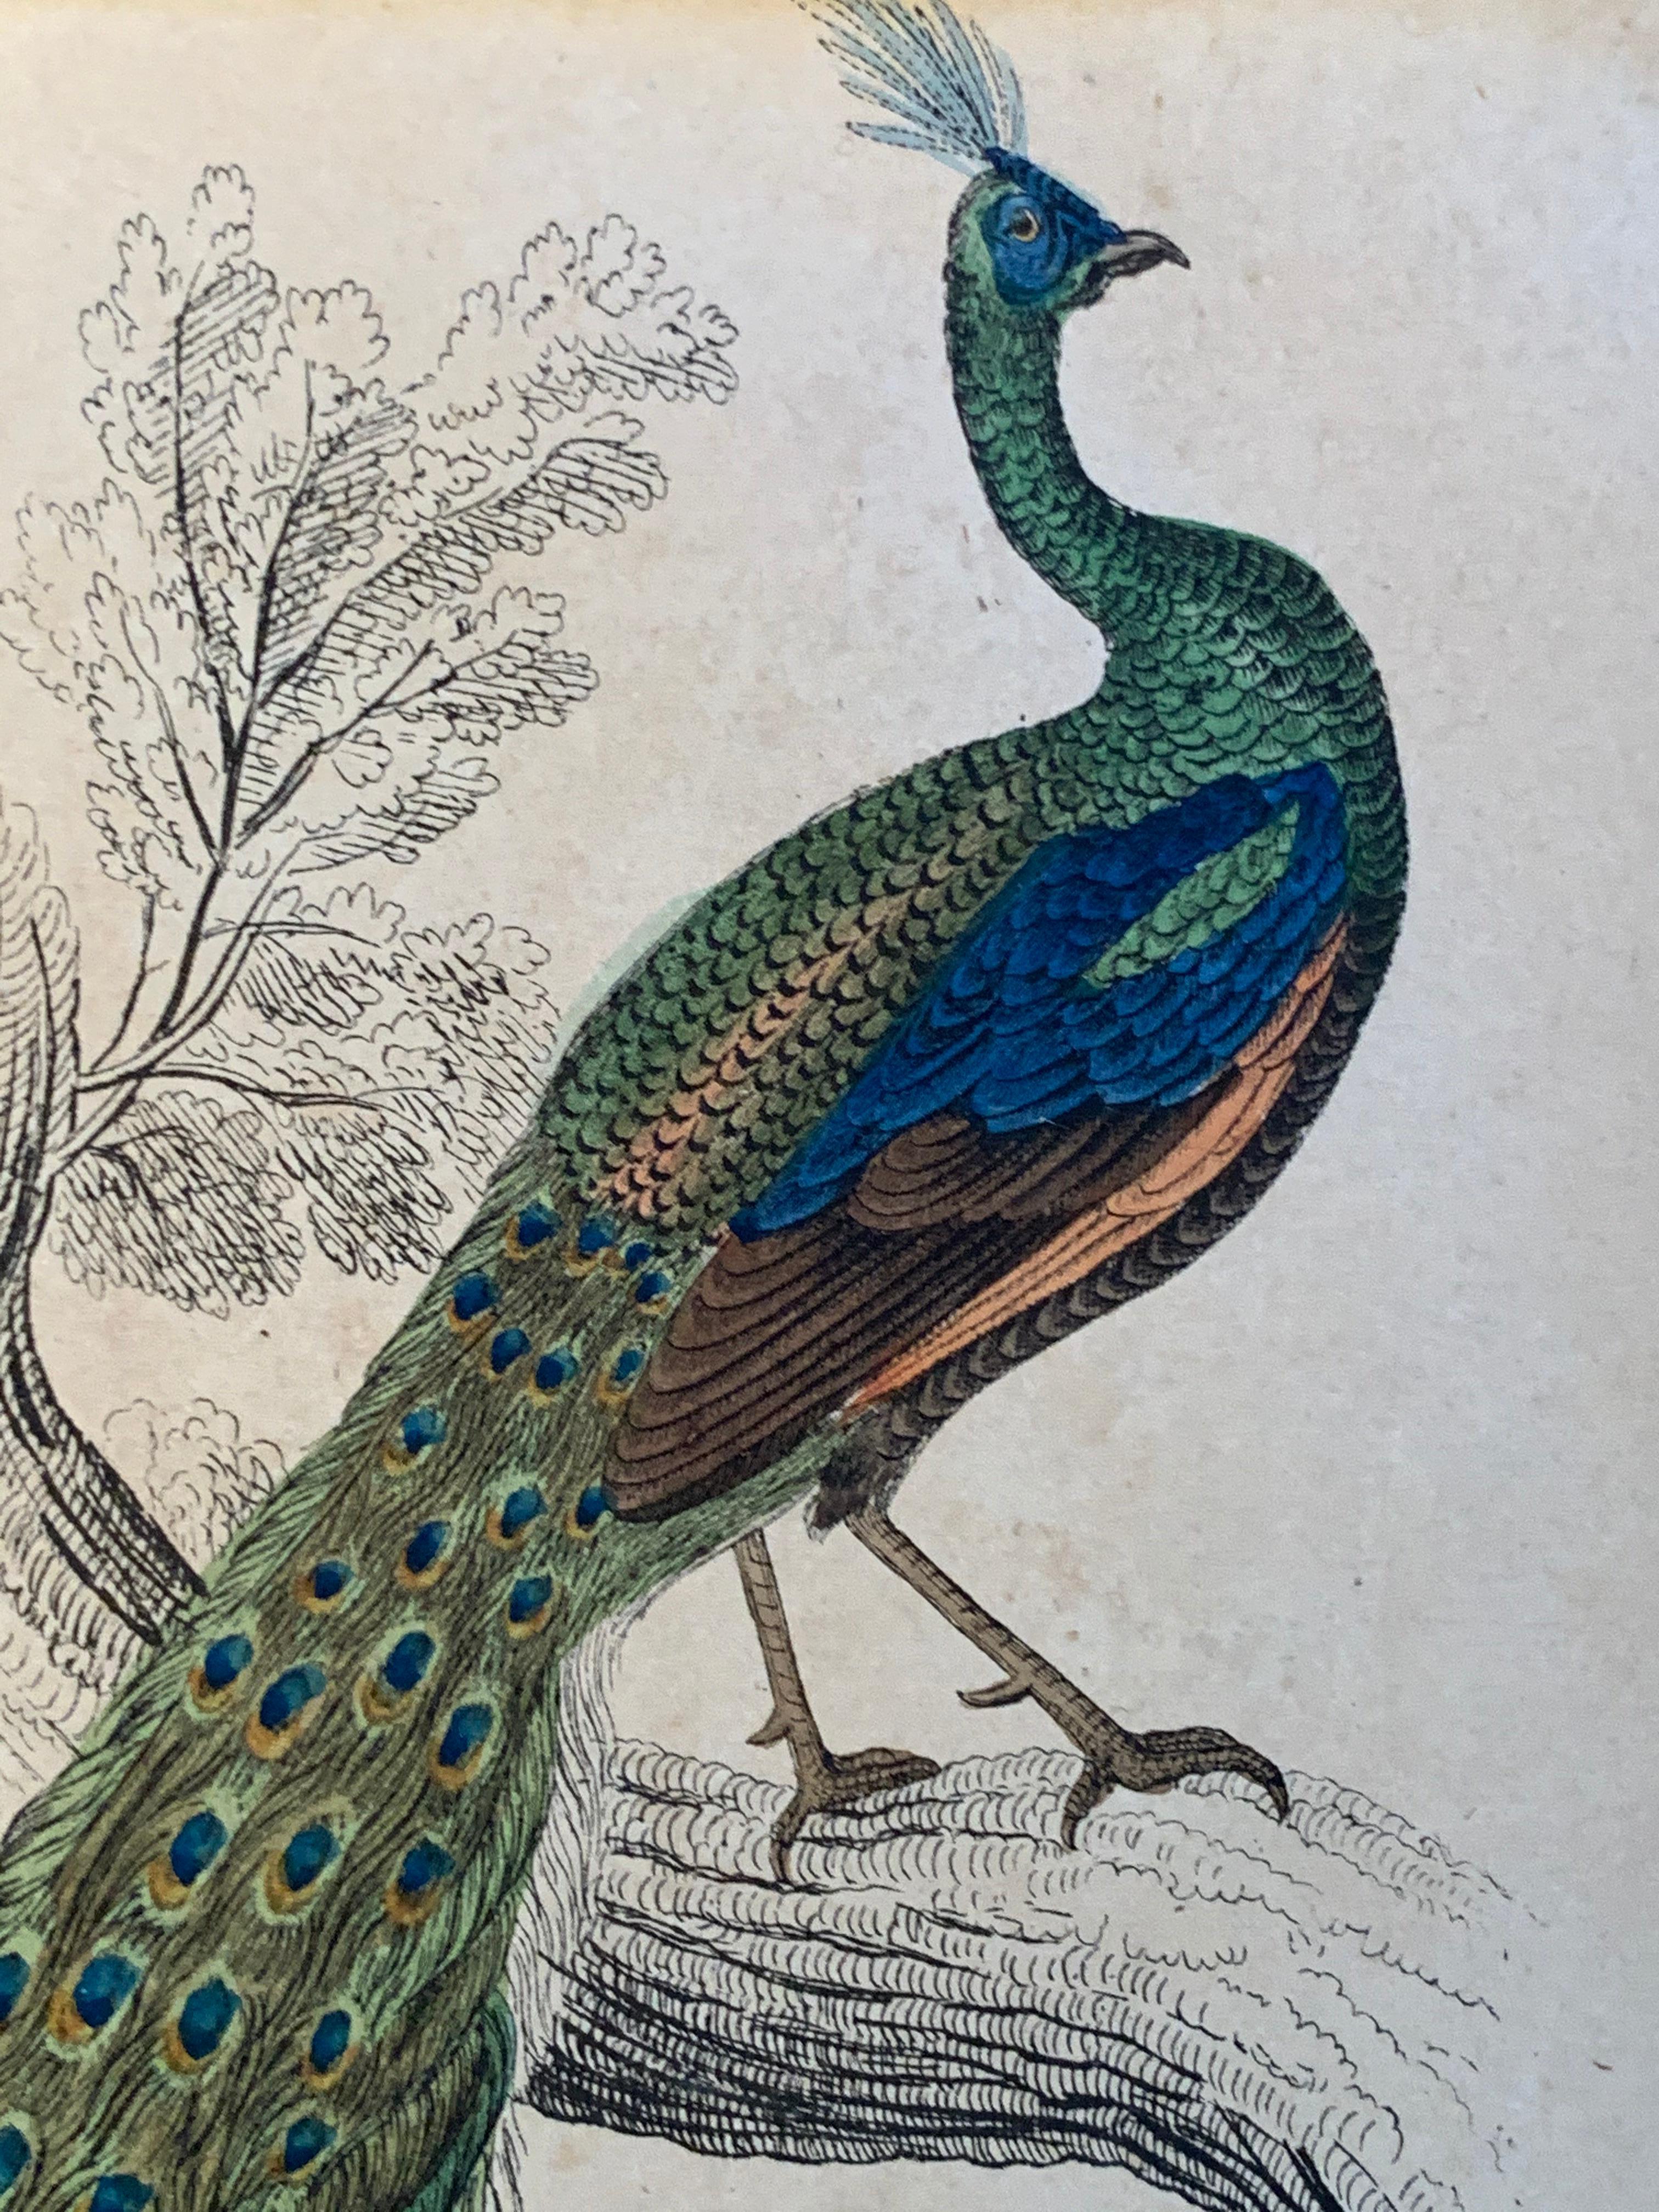 Antique Prints of Rare Exotic Game Birds - Peacock Pheasant Rooster Gamebirds - Painting by Sir William Jardine, 7th Baronet (after)